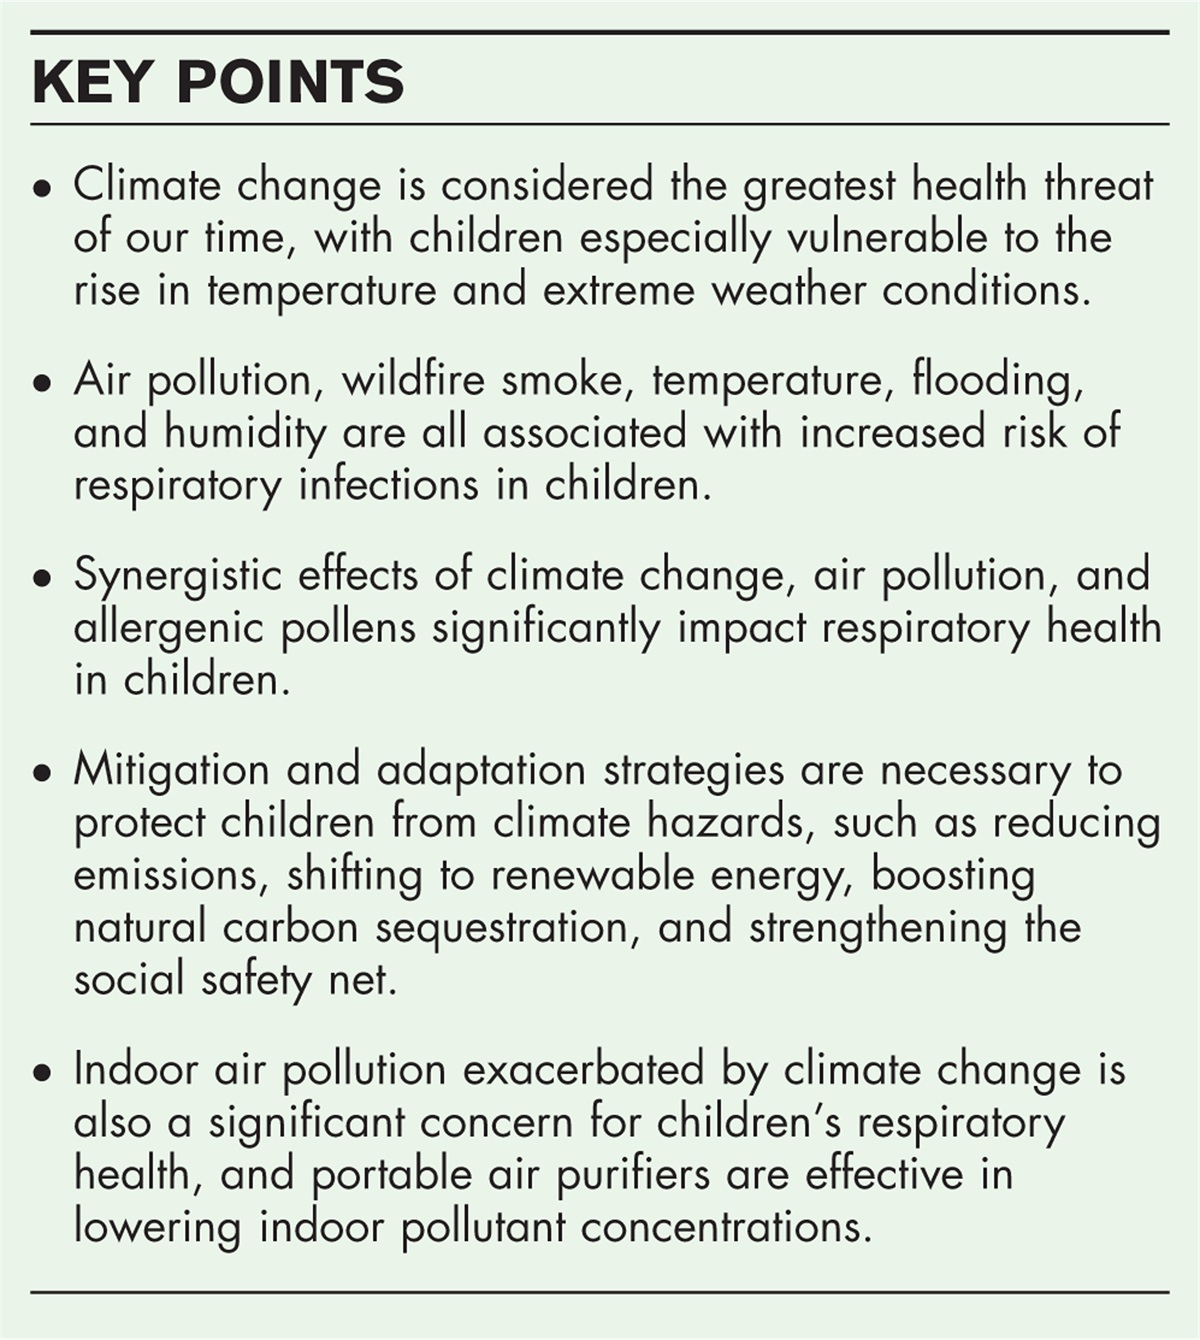 Climate change impacts on children's respiratory health